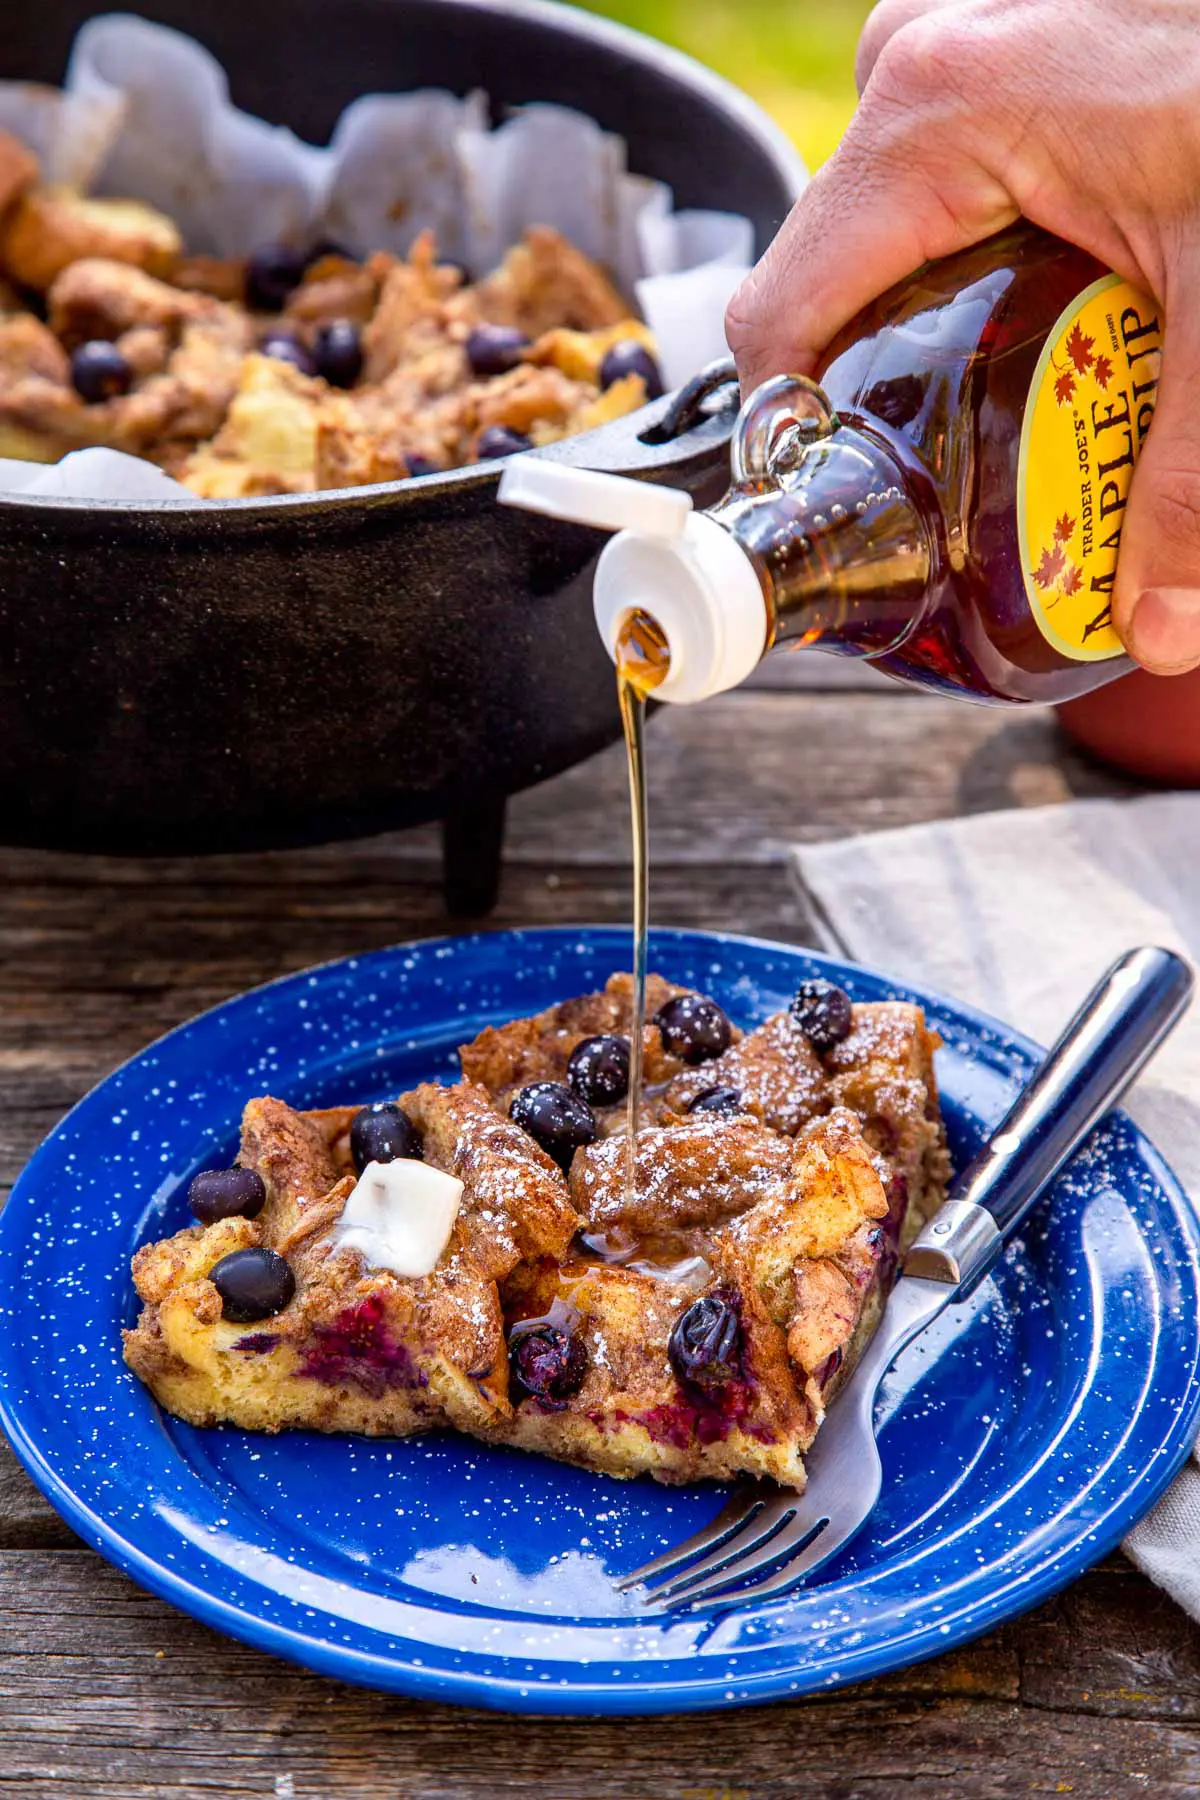 Maple syrup being drizzled over a slice of baked French toast.